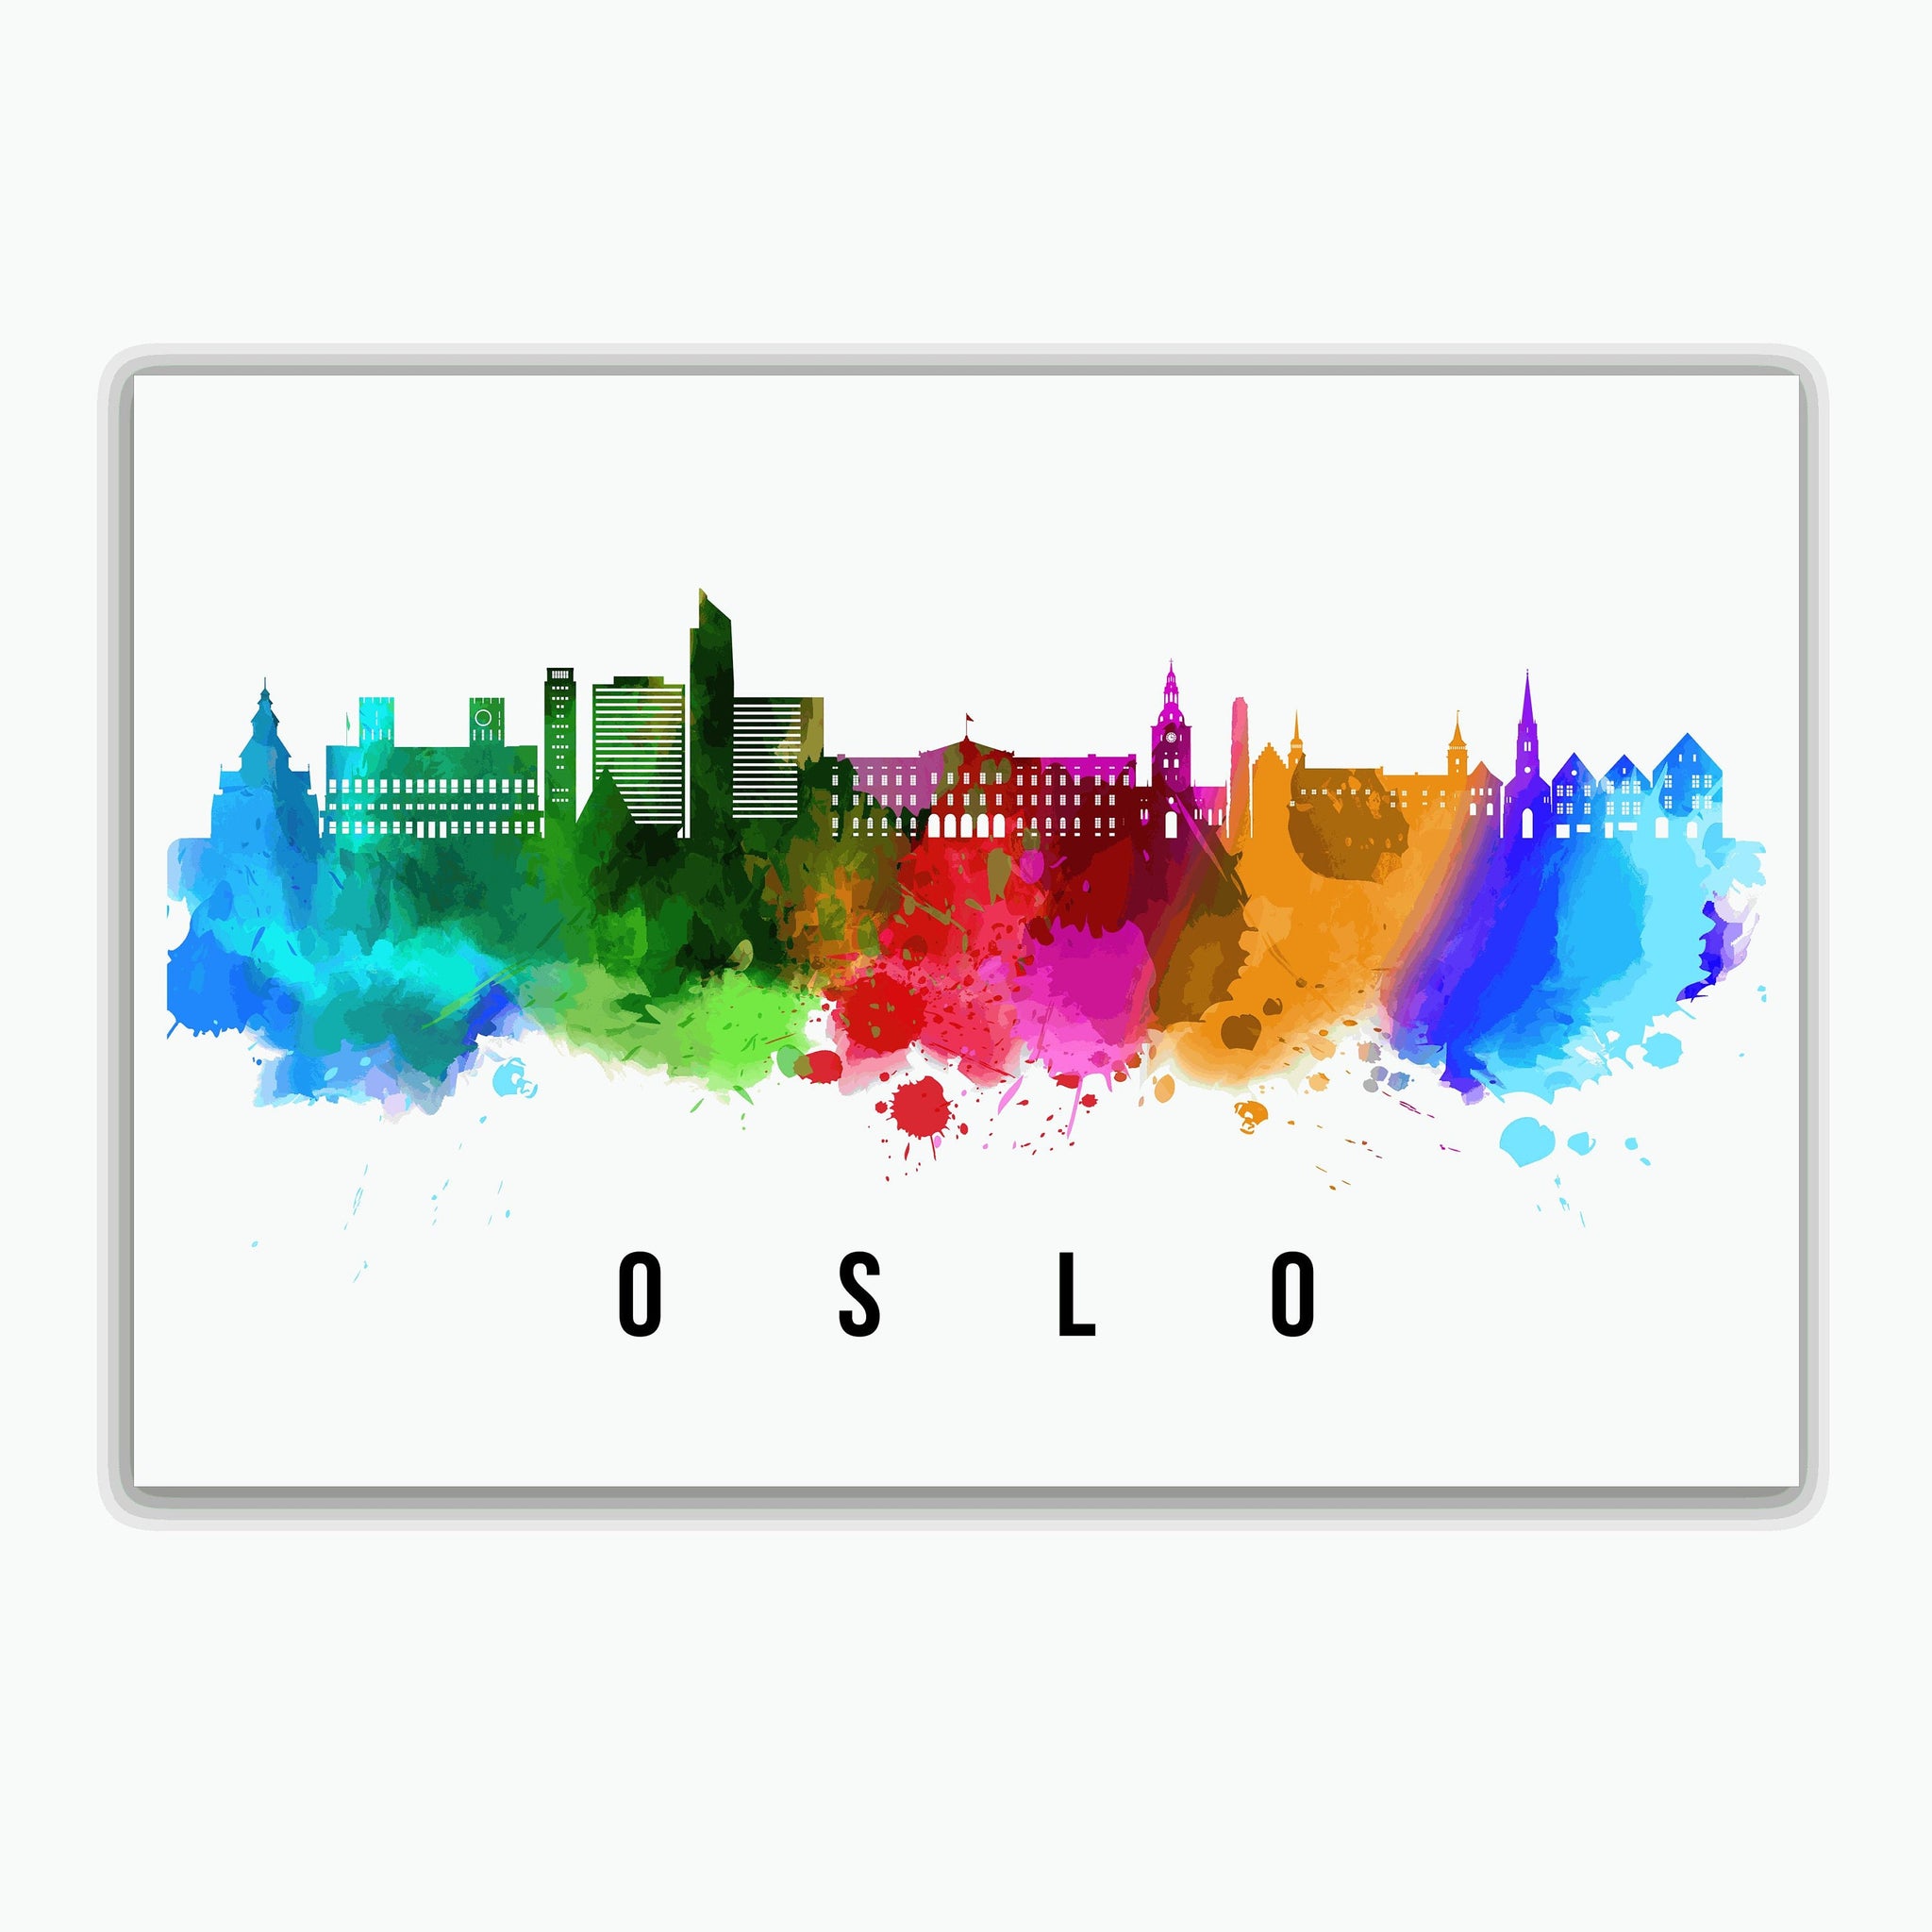 OSLO - NORWAY Poster, Skyline Poster Cityscape and Landmark Oslo City Illustration Home Wall Art, Office Decor